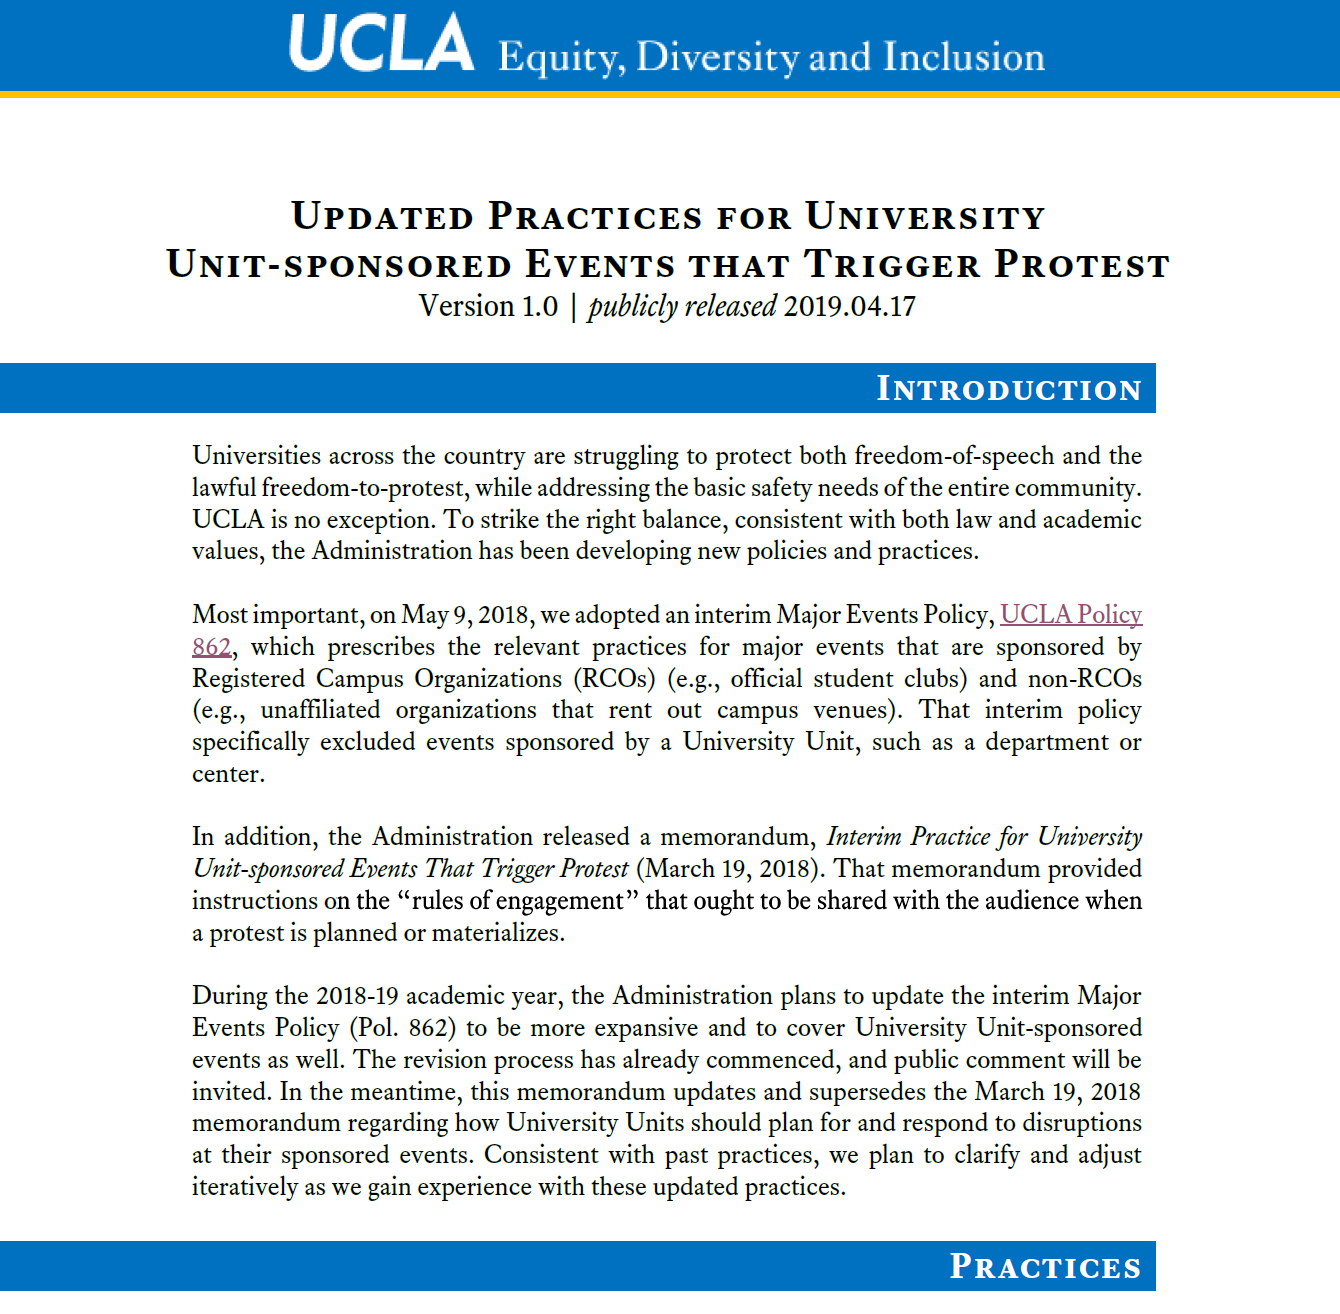 Cover sheet of Updated Practices for University Unit-Sponsored Events That Trigger Protests document